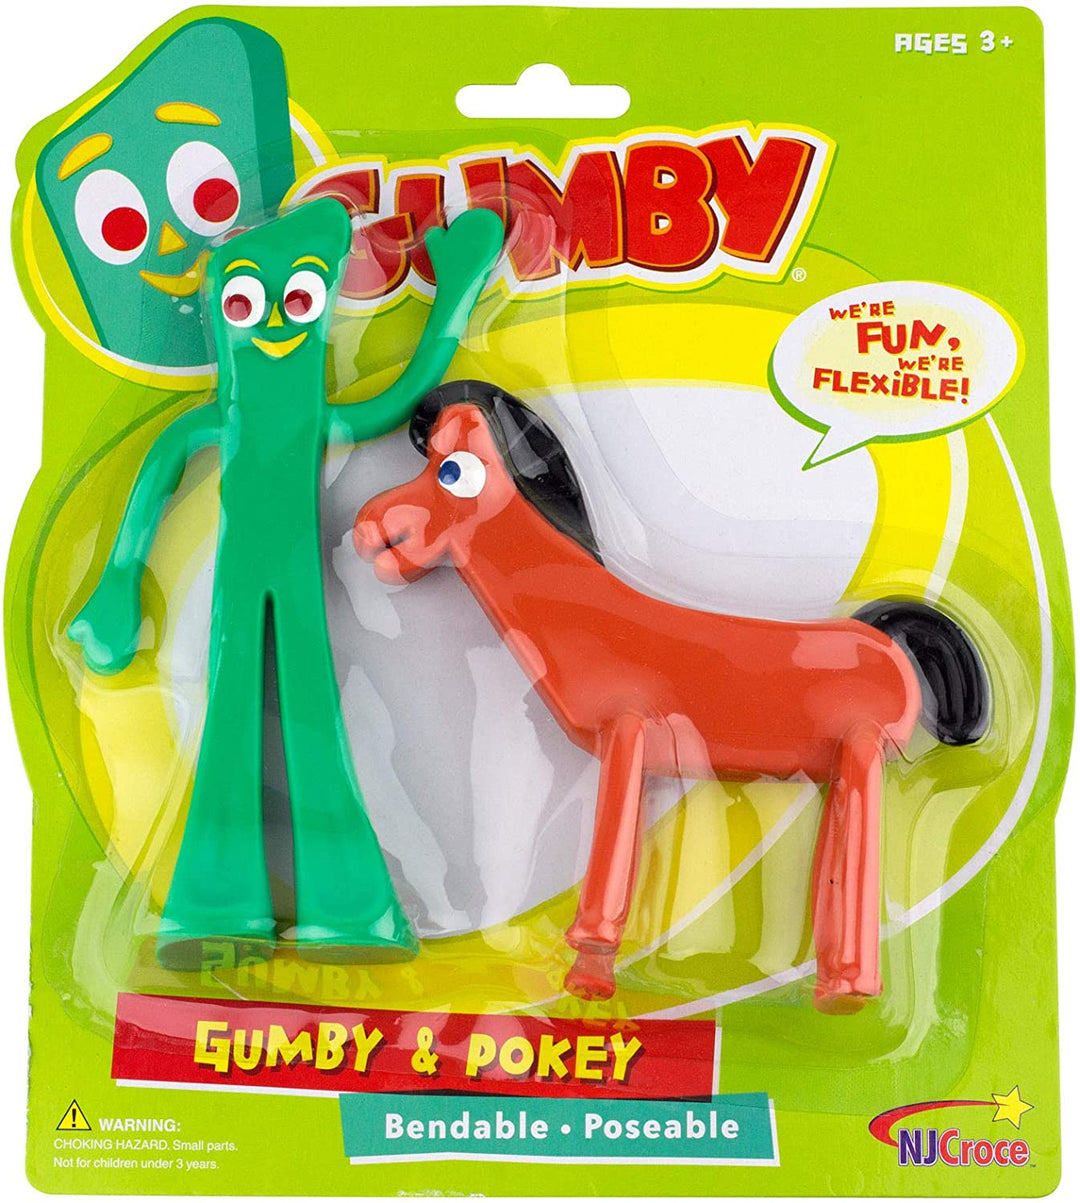 Gumby - Bendable Poseable Figurines